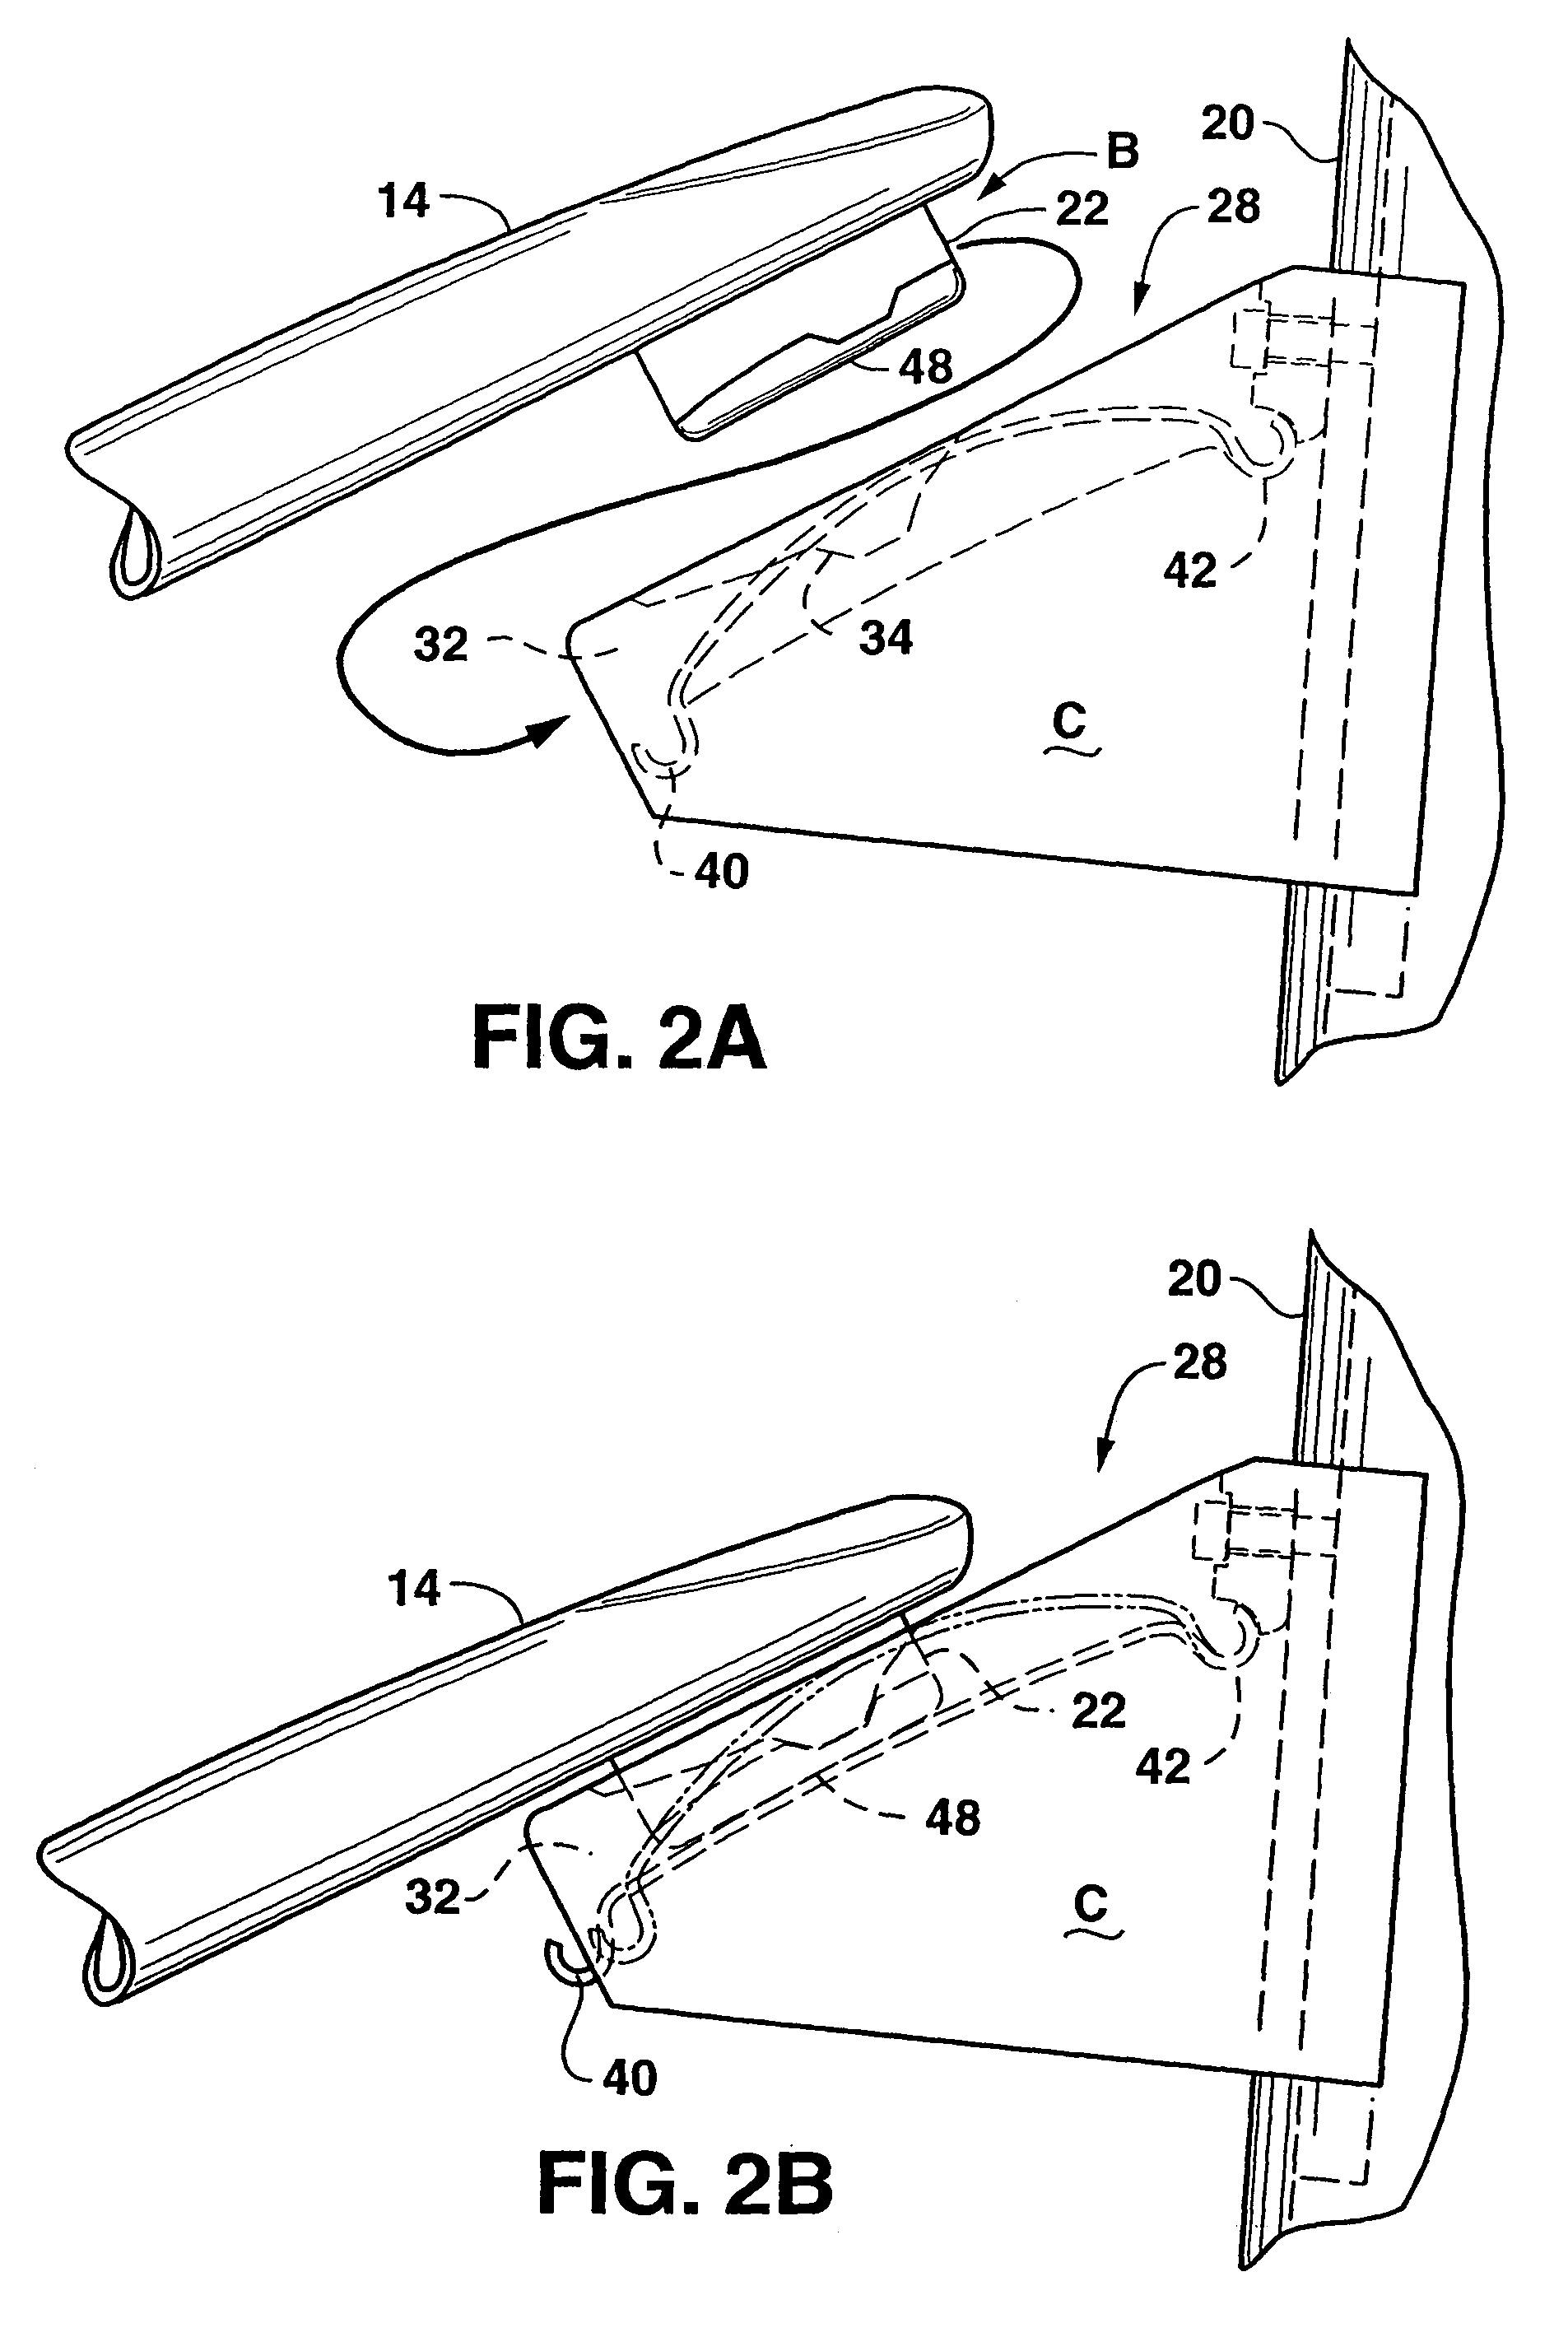 Mirror stabilizer arm connector assembly